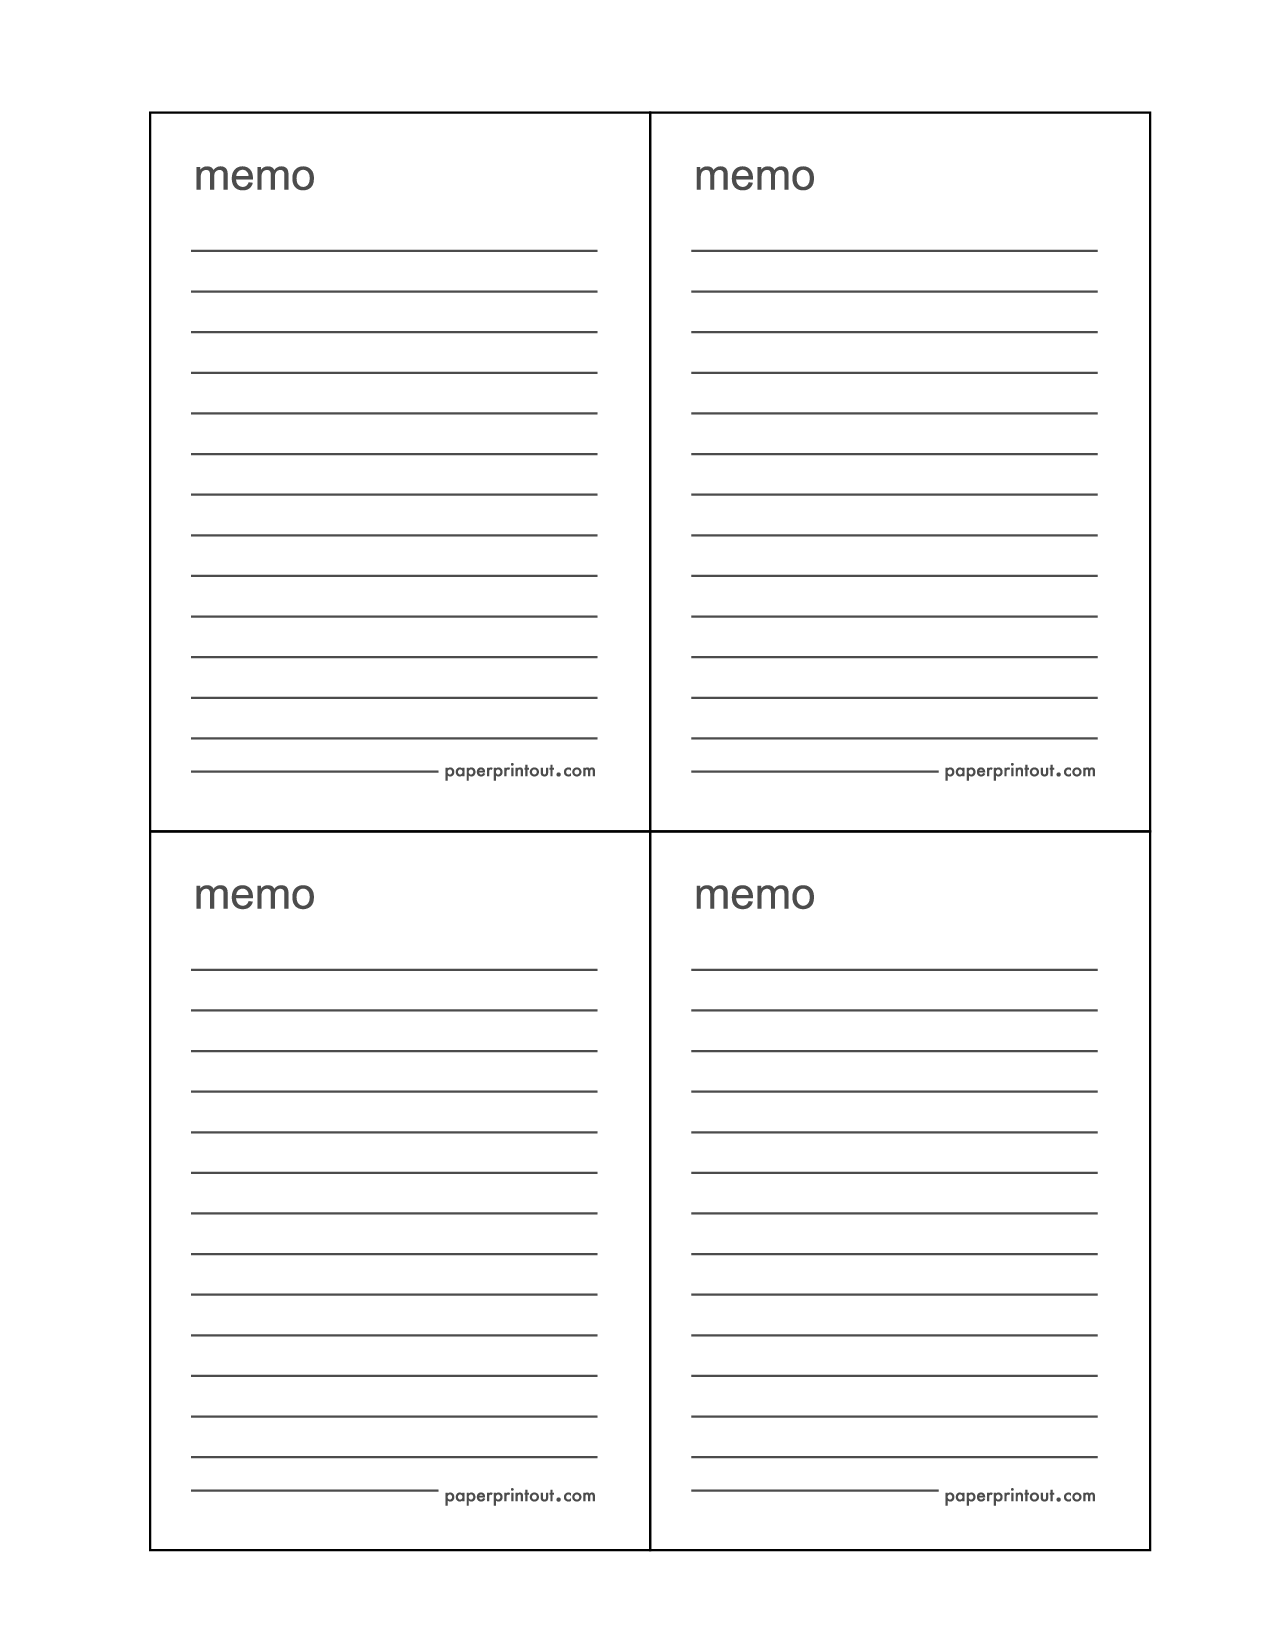 8 Best Images of Printable Memo Templates Business Memo Template Word